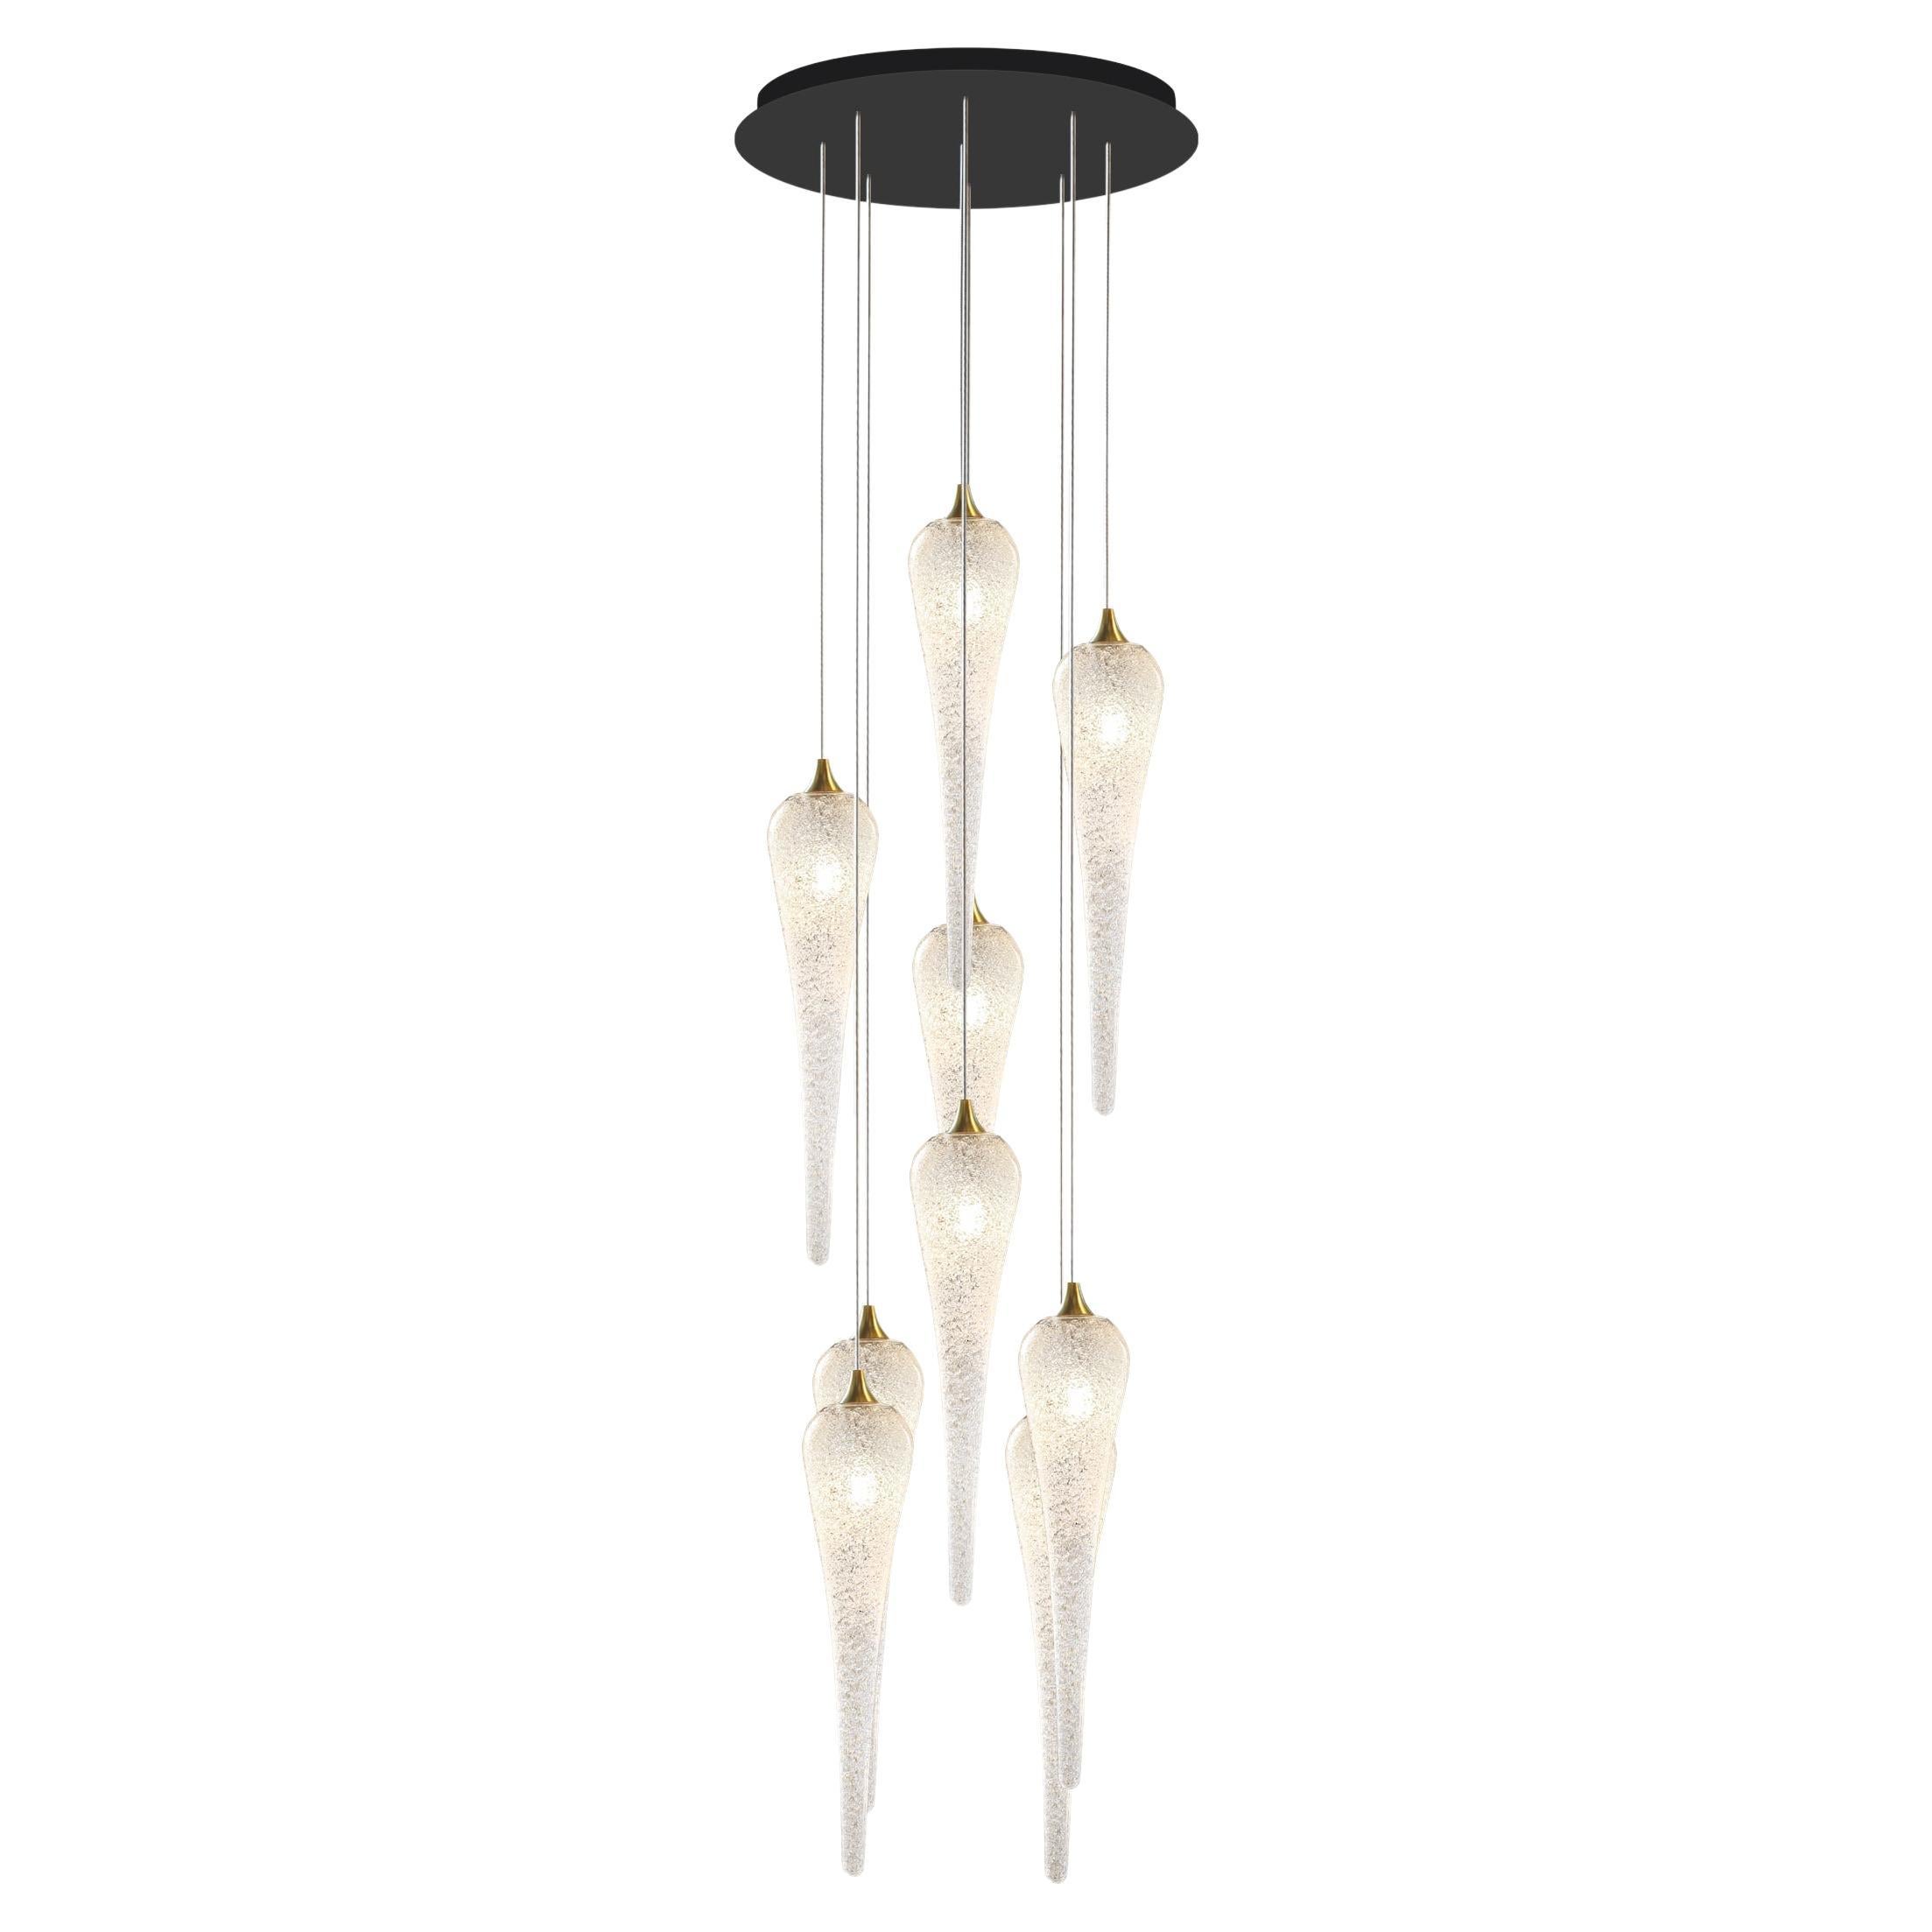 ICICLE Artisanal Hand-Blown Glass Chandelier, 9 Crystal Flakes Pendants LED